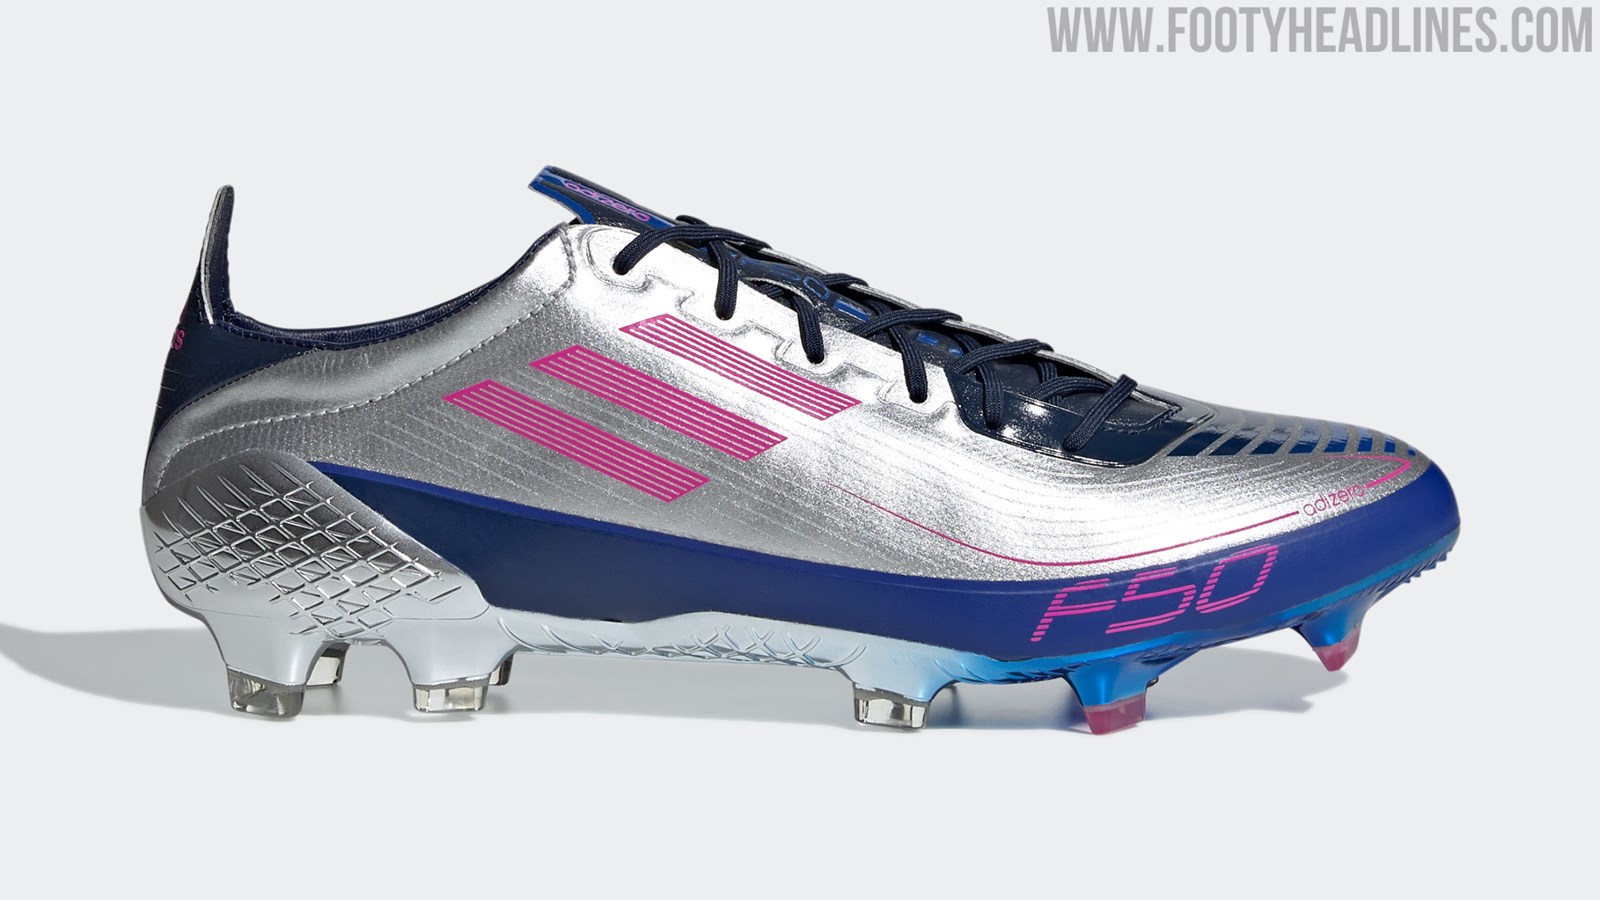 Adidas F50 Champions League Boots Released - Footy Headlines